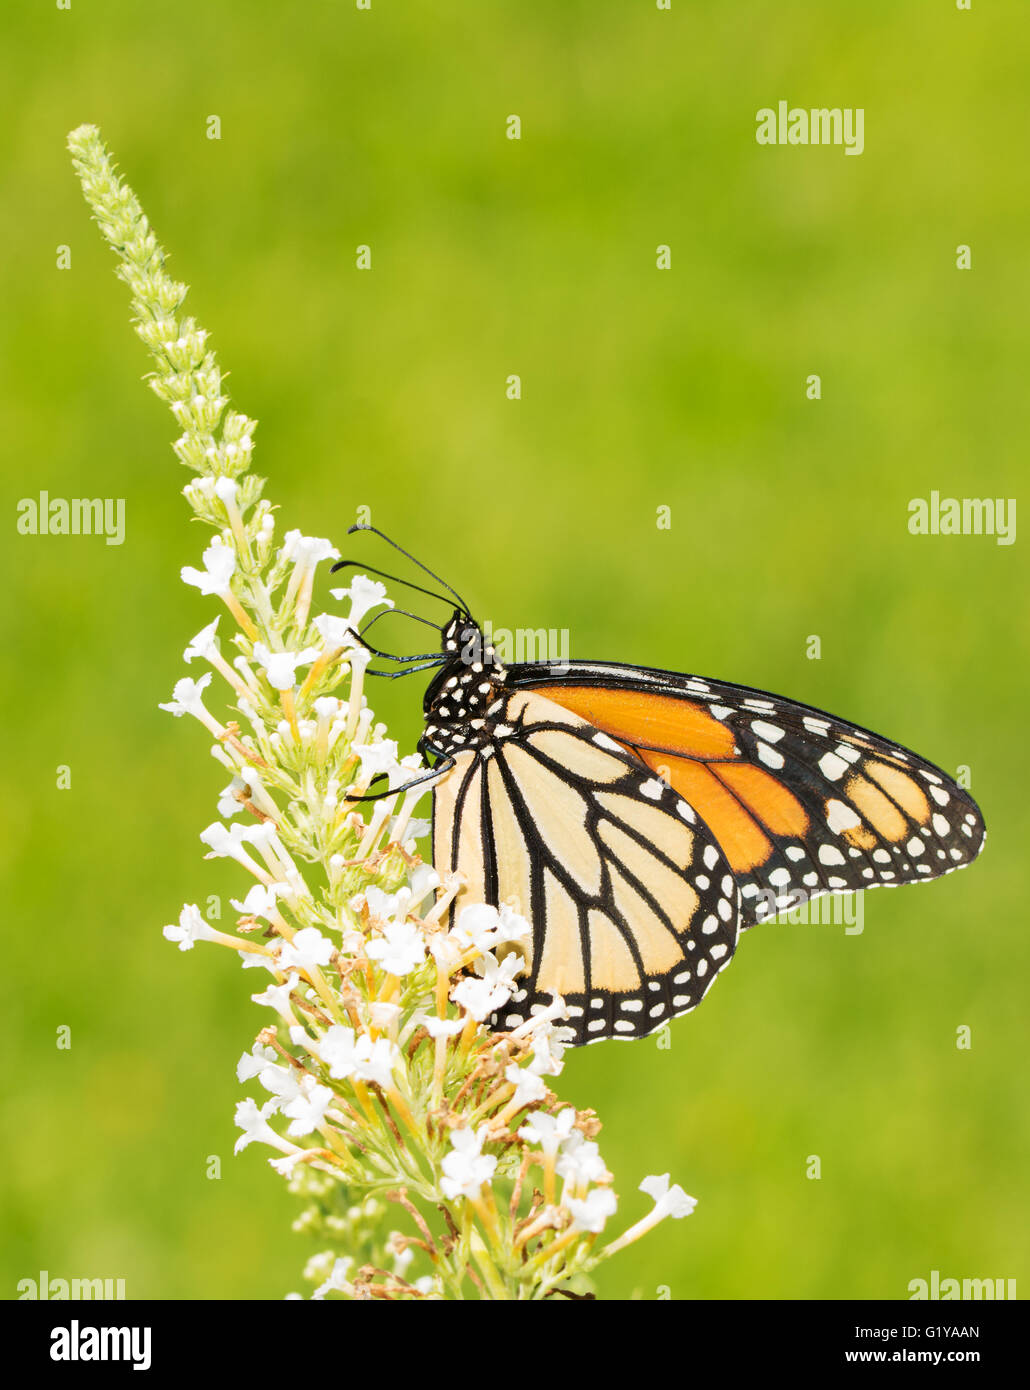 Female Monarch butterfly feeding on white Butterfly Bush flowers, with green background Stock Photo